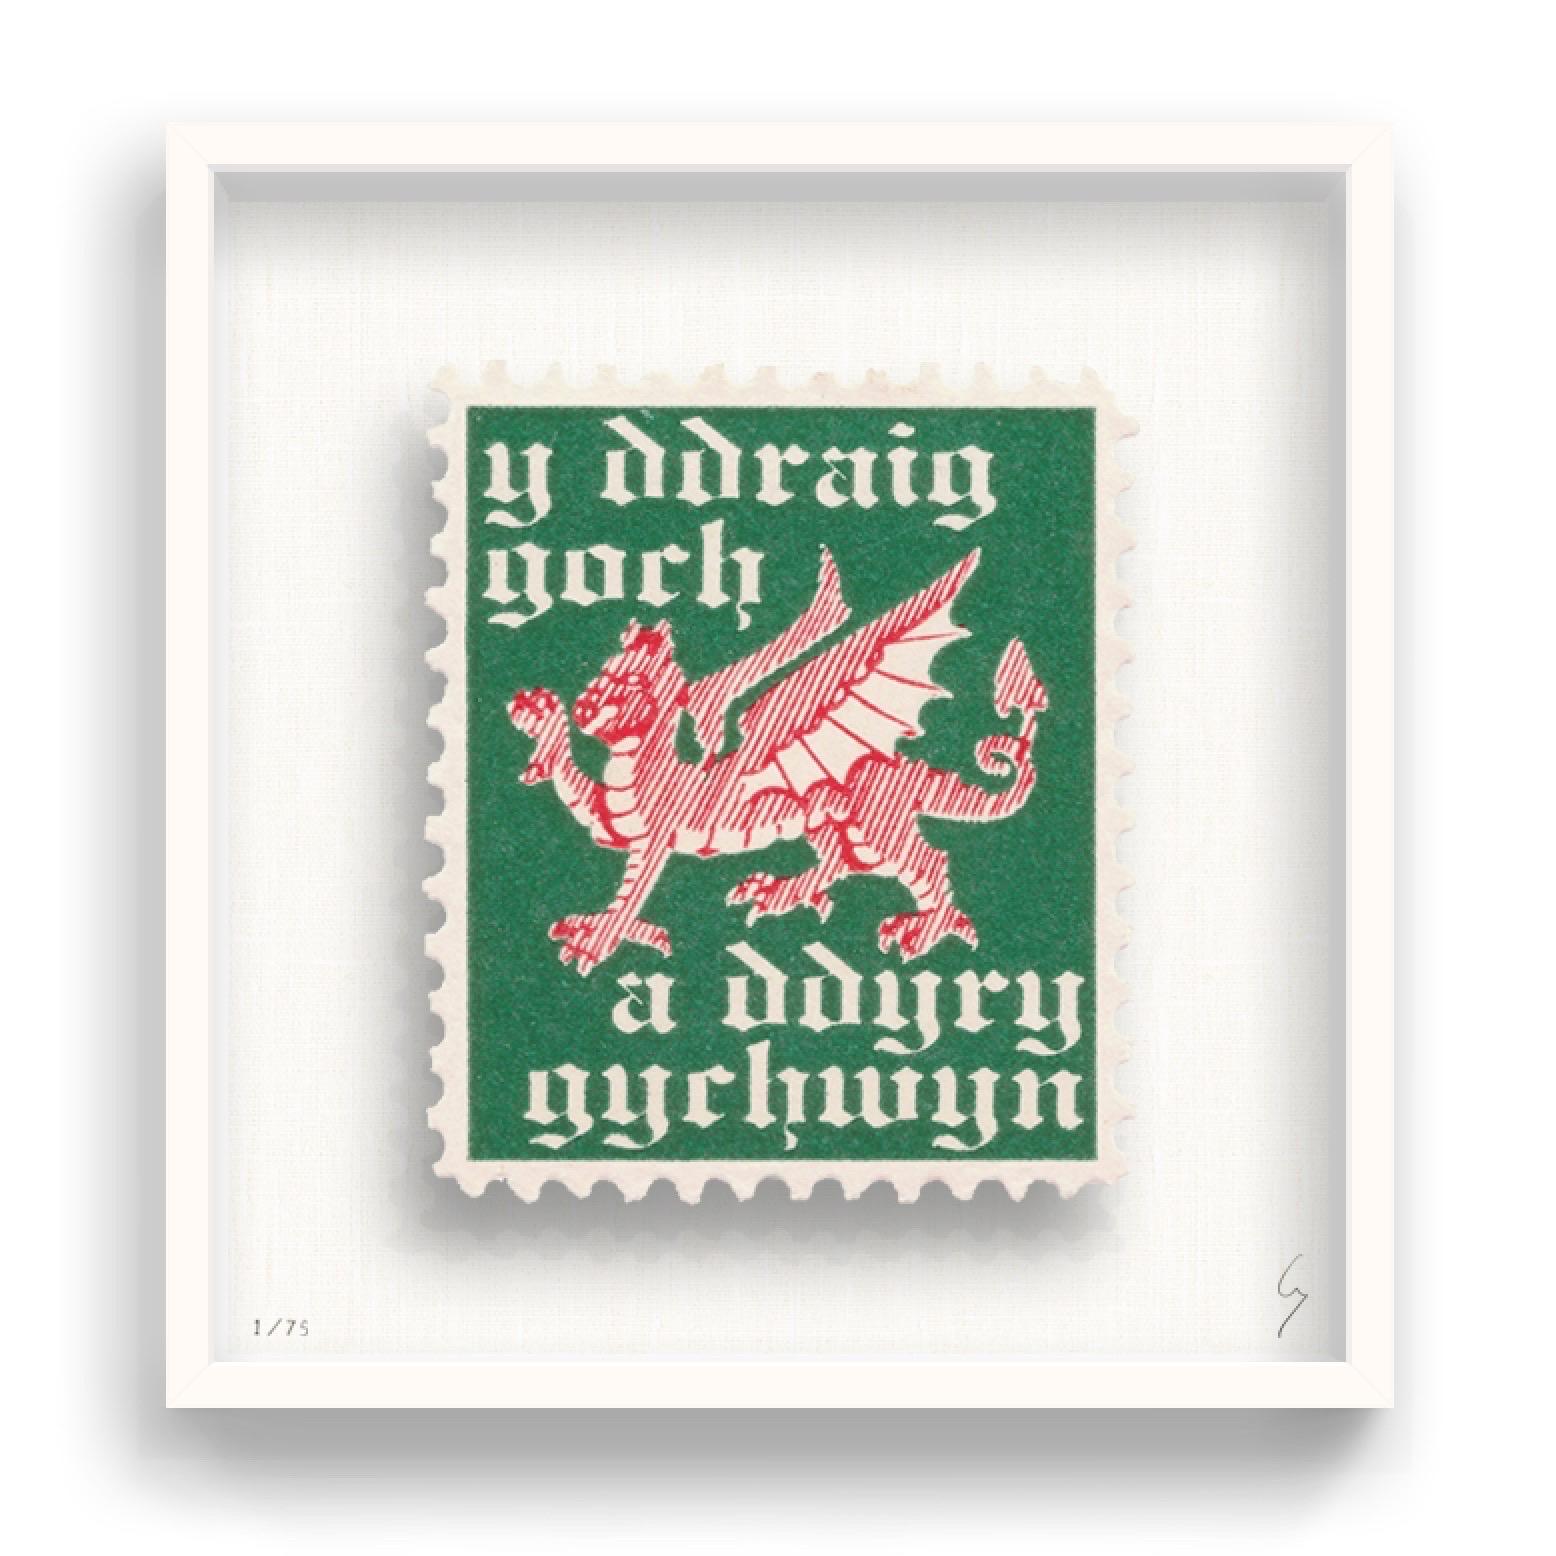 Guy Gee, Wales (medium)

Hand-engraved print on 350gsm on G.F Smith card
31 x 35 cm (12 1/5 x 13 4/5)
Frame included 
Edition of 75 

Each artwork by Guy had been digitally reimagined from an original postage stamp. Cut out and finished by hand, the